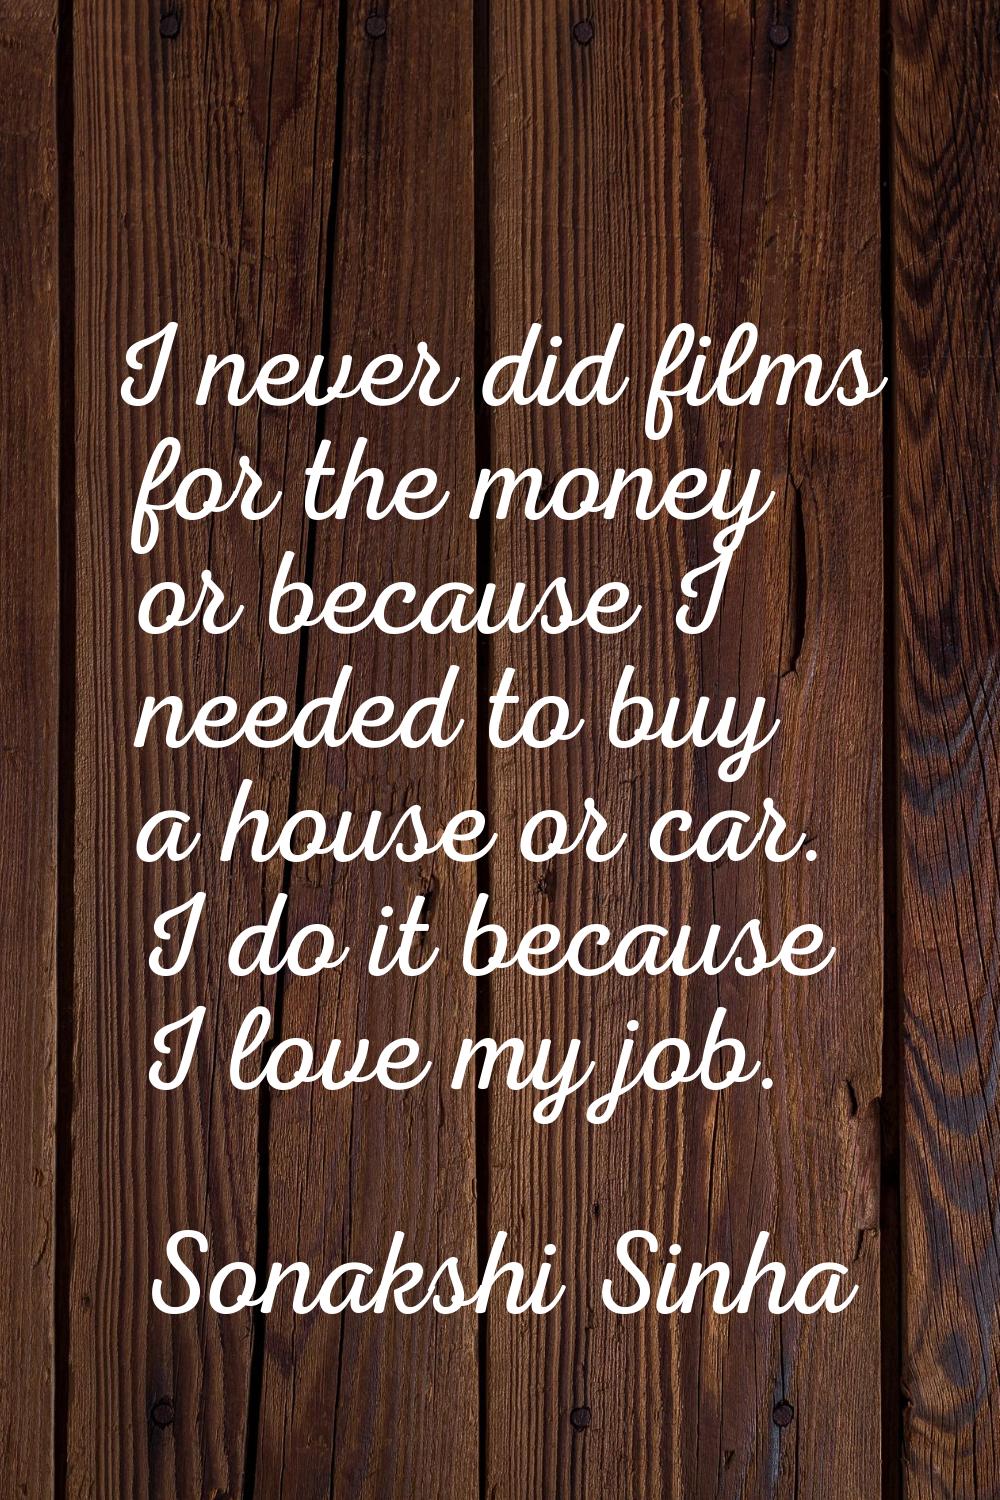 I never did films for the money or because I needed to buy a house or car. I do it because I love m